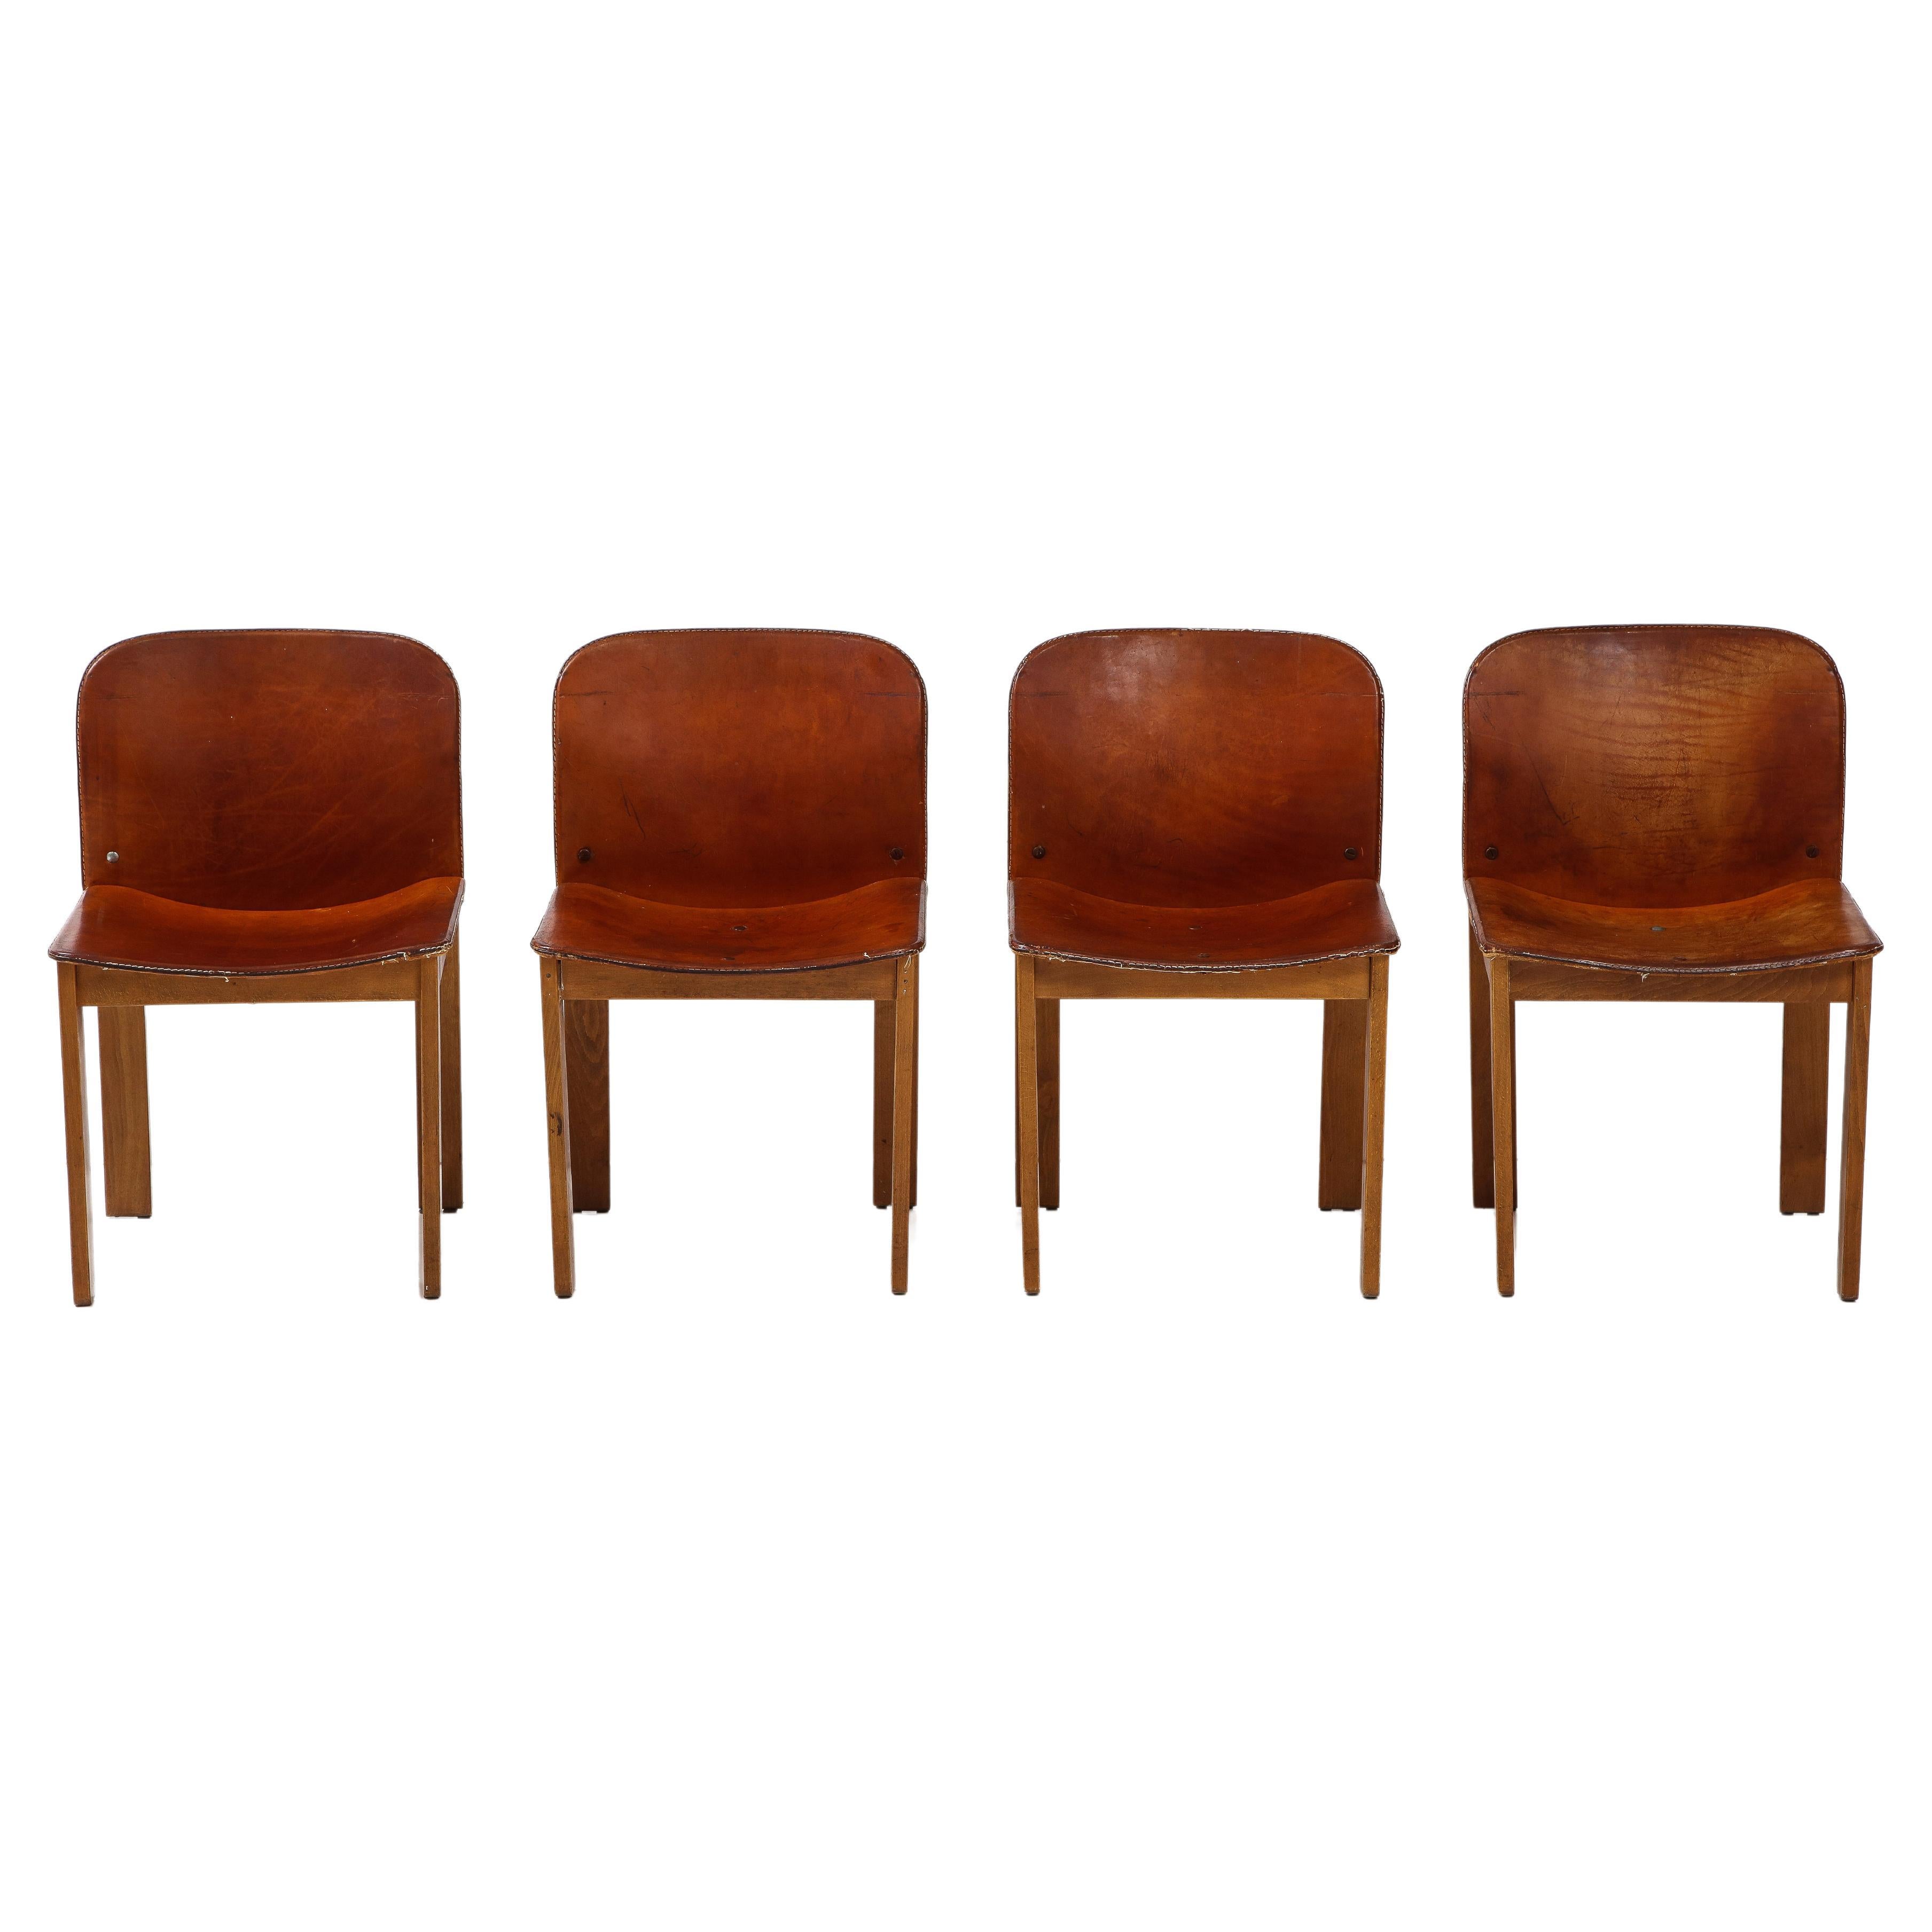 Set of 4 model '121' dining chairs; These chairs have walnut wooden frames and seats and backs covered with cognac colored leather. 
Designed by Afra and Tobia Scarpa and manufactured by Cassina, Italy 1965. 
Size: 31